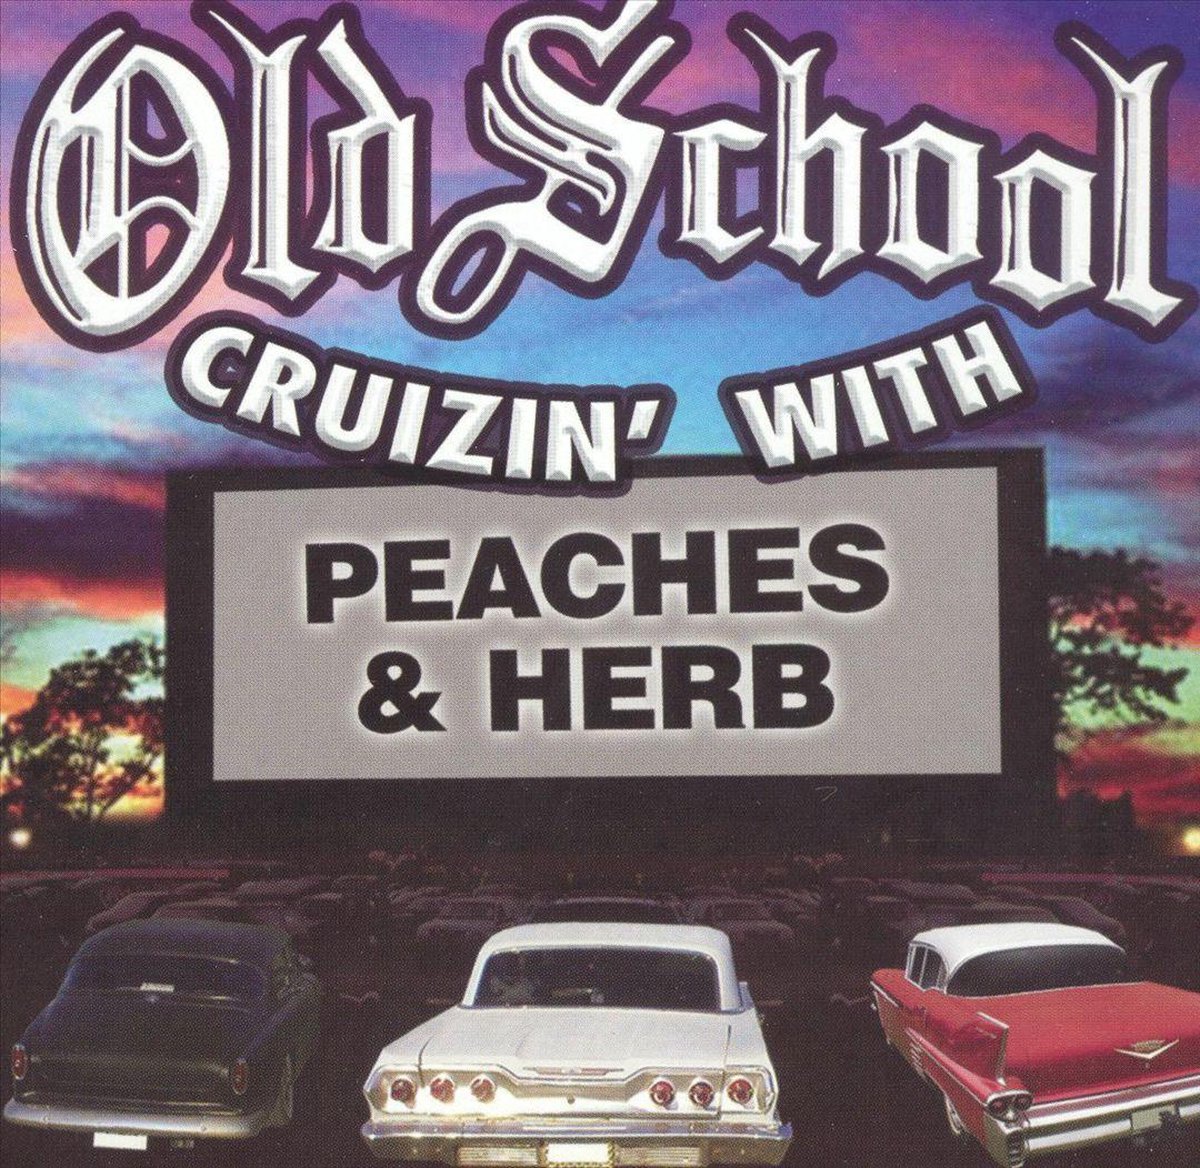 Old School Cruizin With - Peaches & Herb